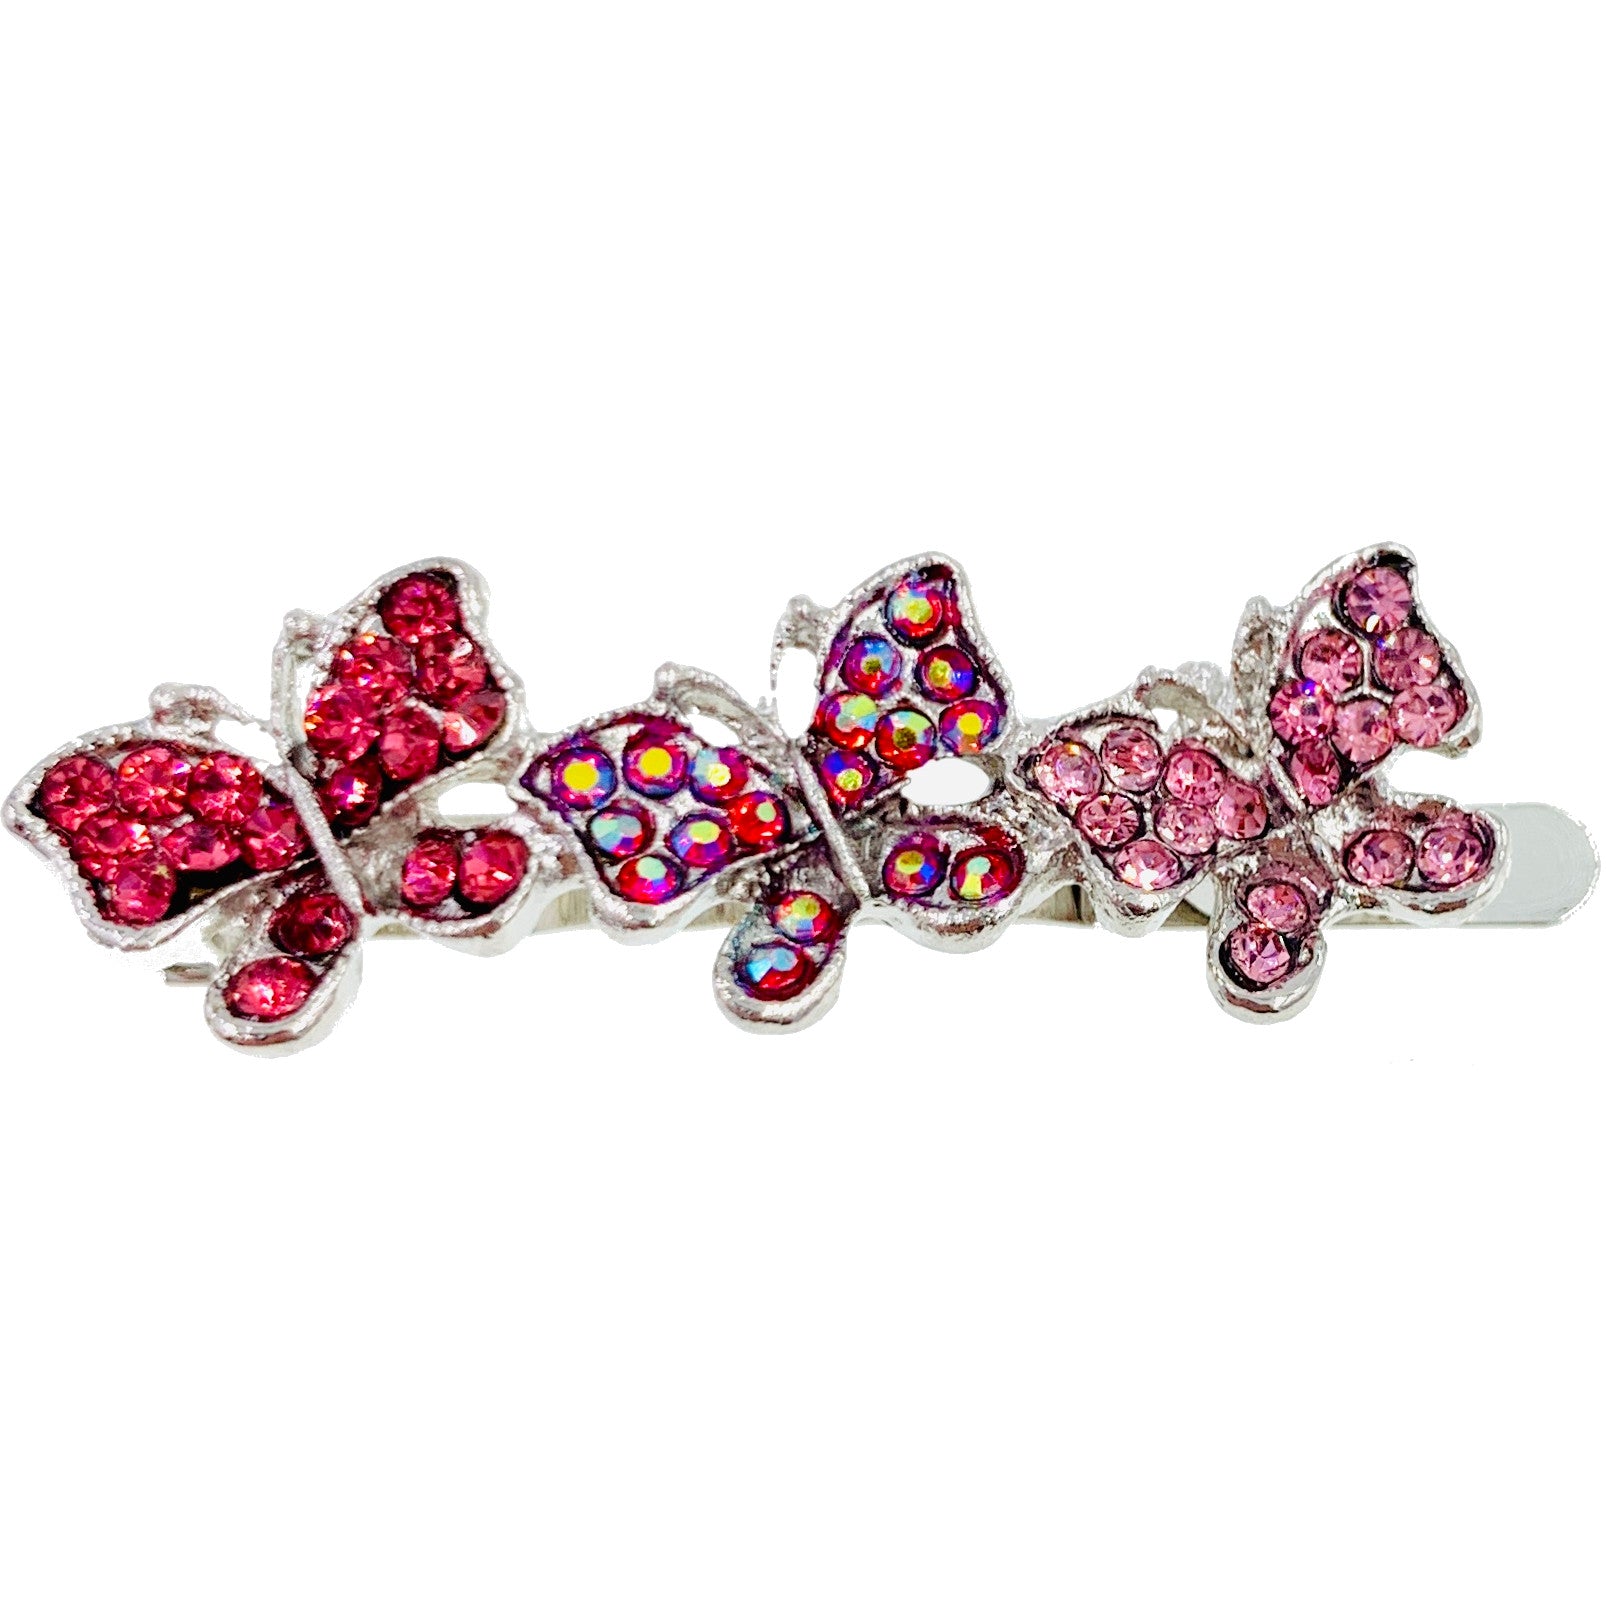 Viceroy Butterfly Magnetic Hair Clip Rhinestone Crystal Hairpin Small Barrette, Magnetic Clip - MOGHANT